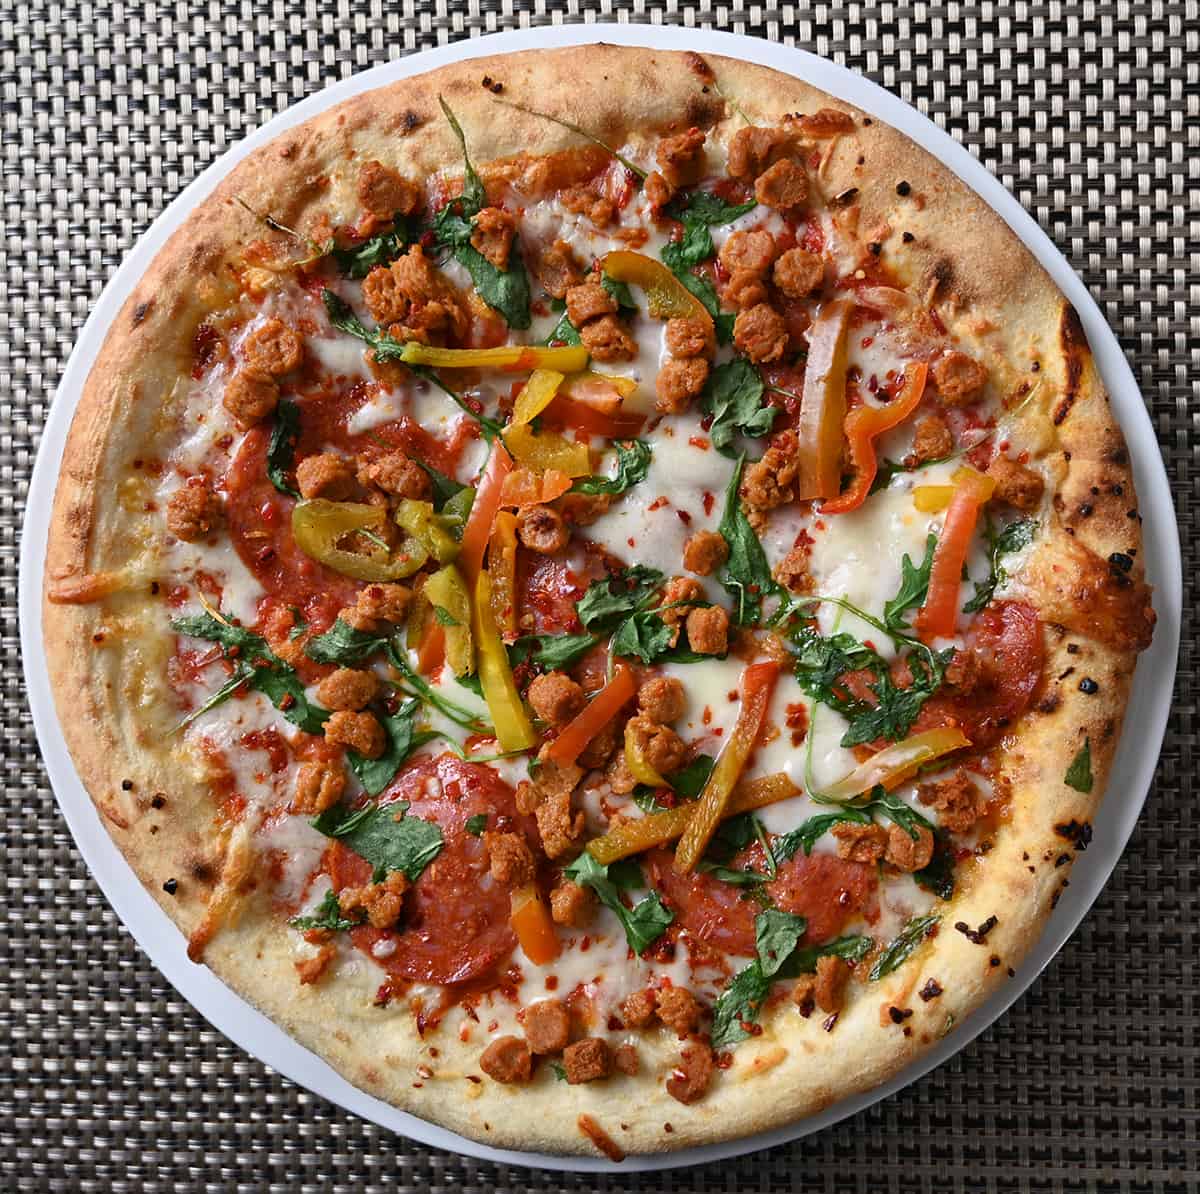 Top down image of a sausage, salami, arugula and grilled peppers pizza baked and served whole on a white plate.